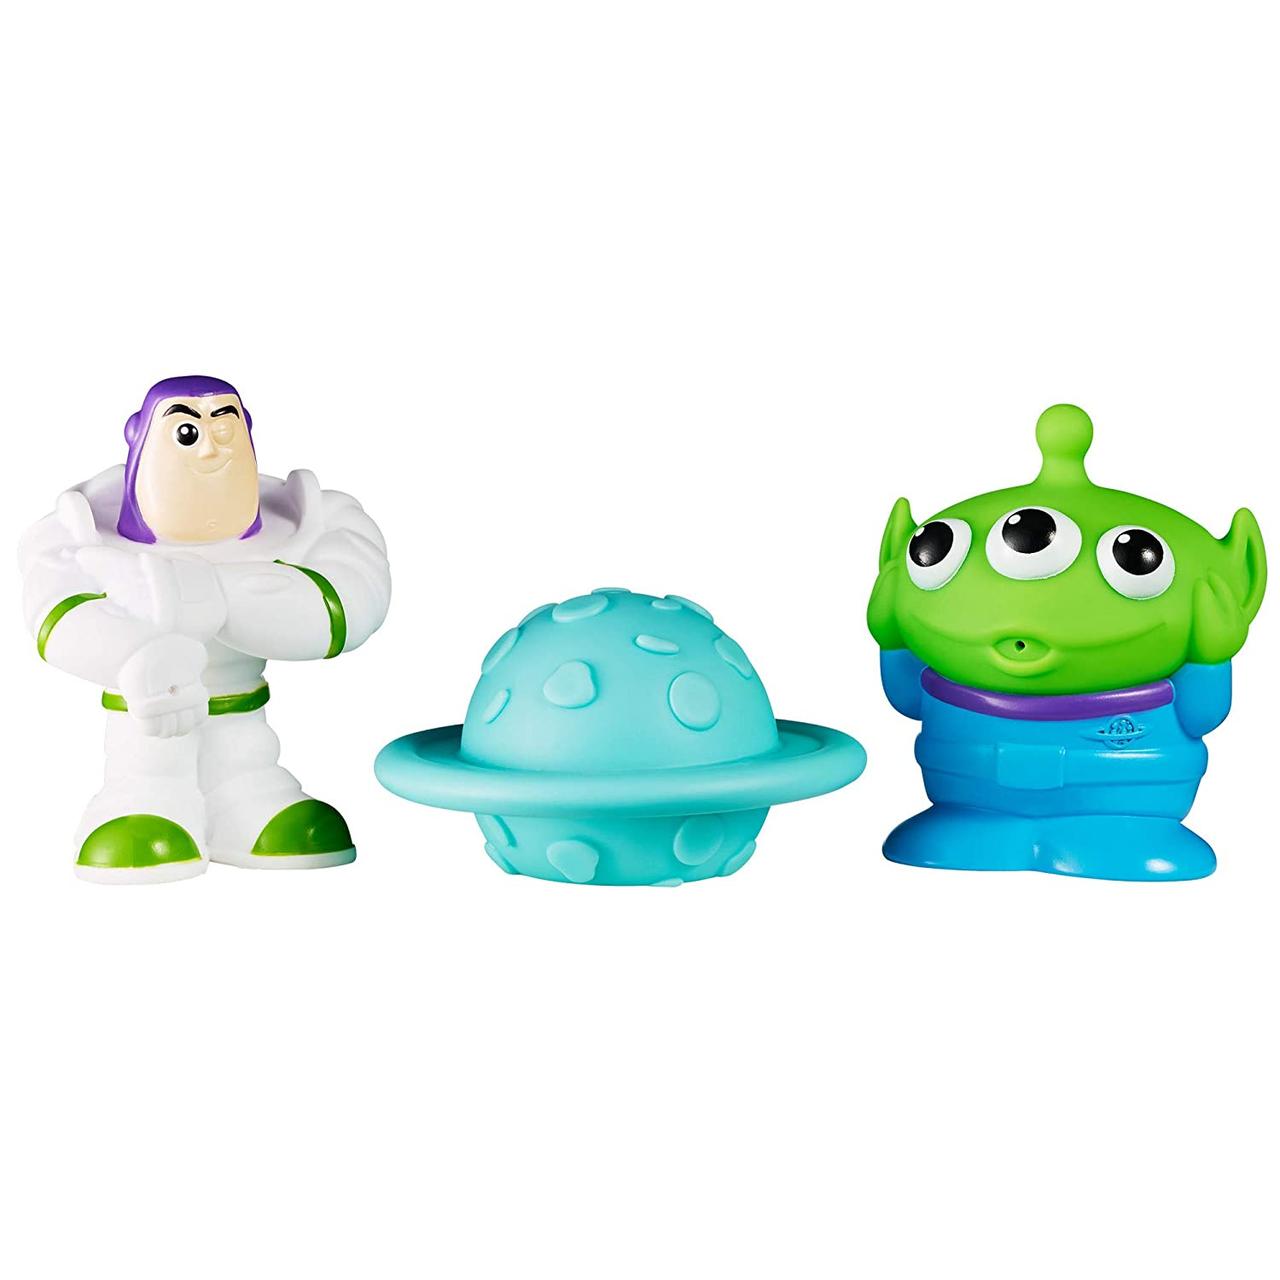 Toy Story The First Years Disney Finding Nemo Bath Toys - Dory, Nemo, and Squirt — Squirting Kids Bath To